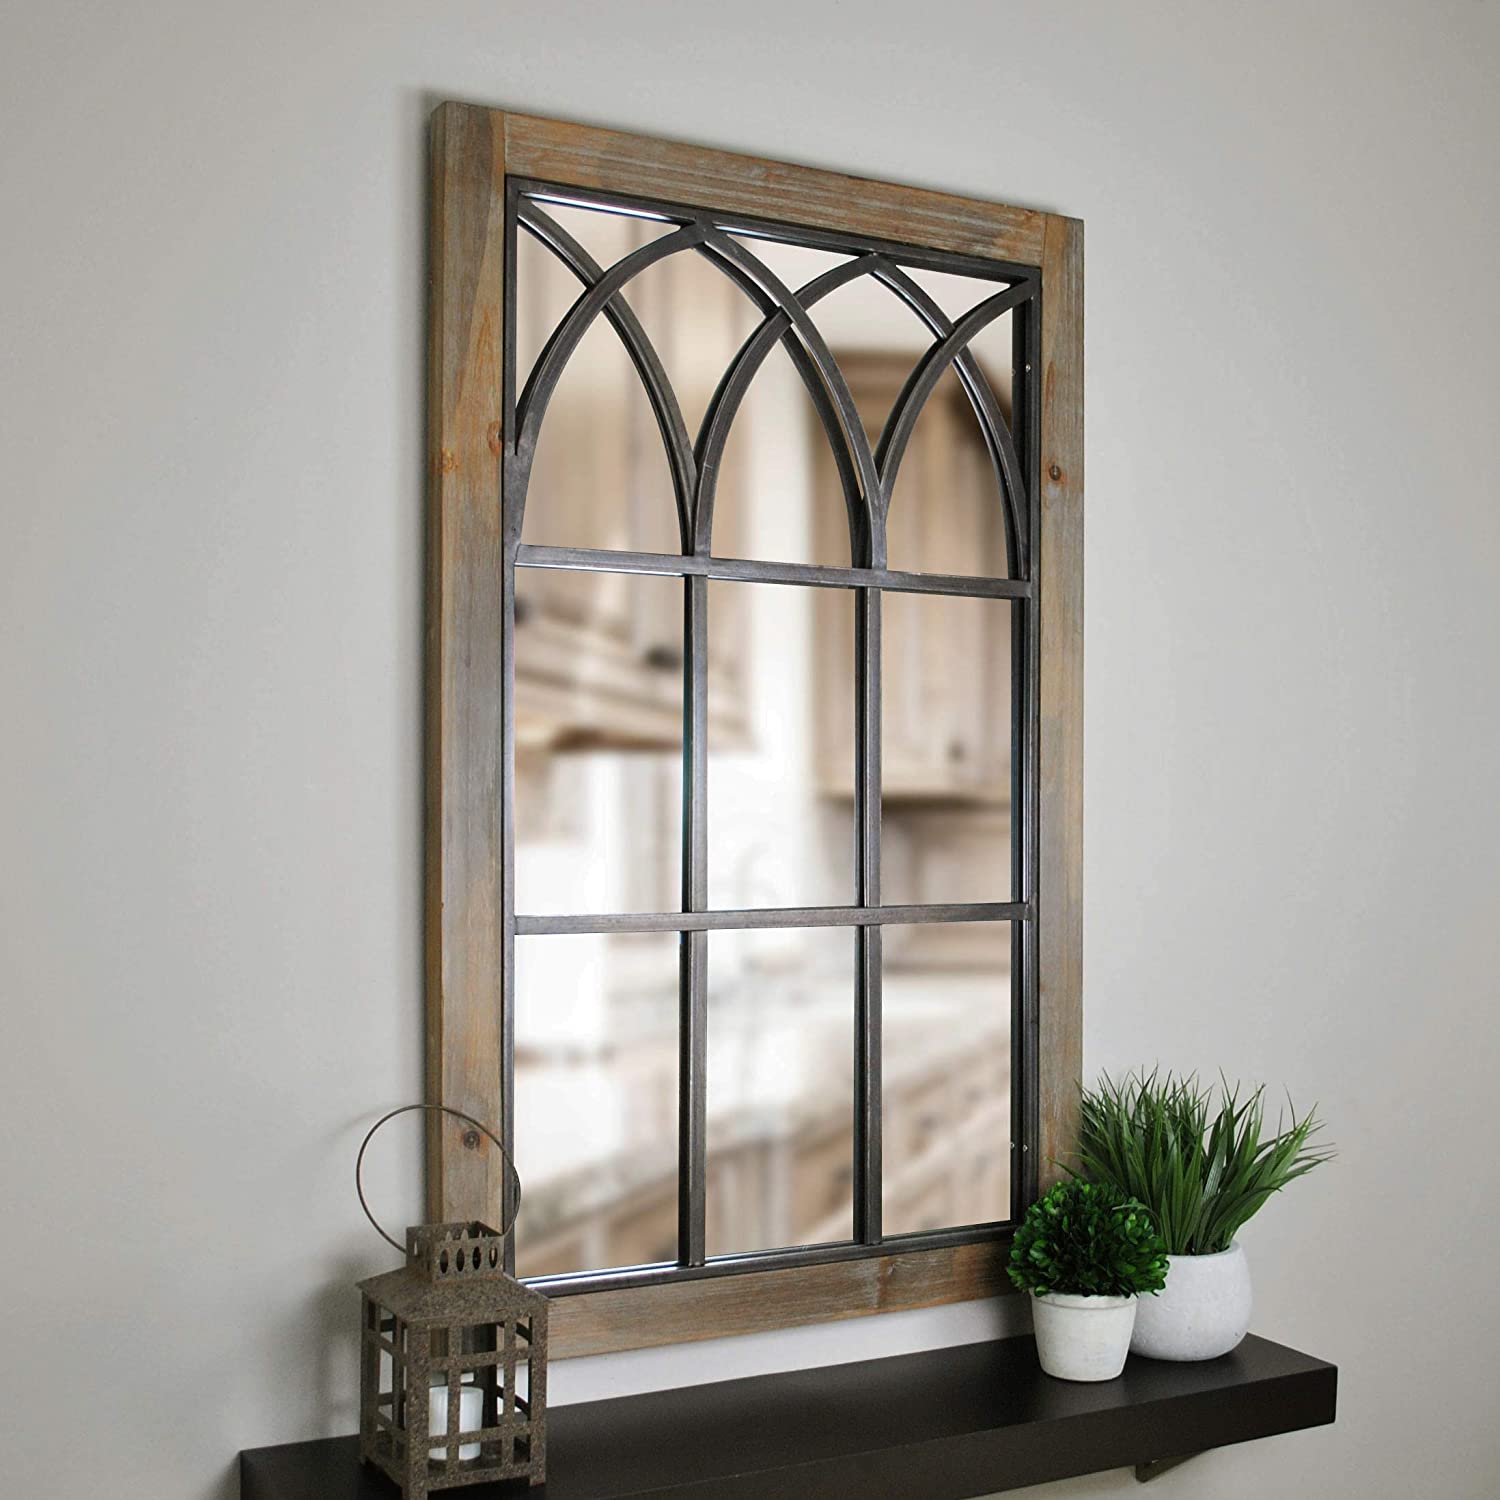 Add Interest To Your Wall With A Window Mirror